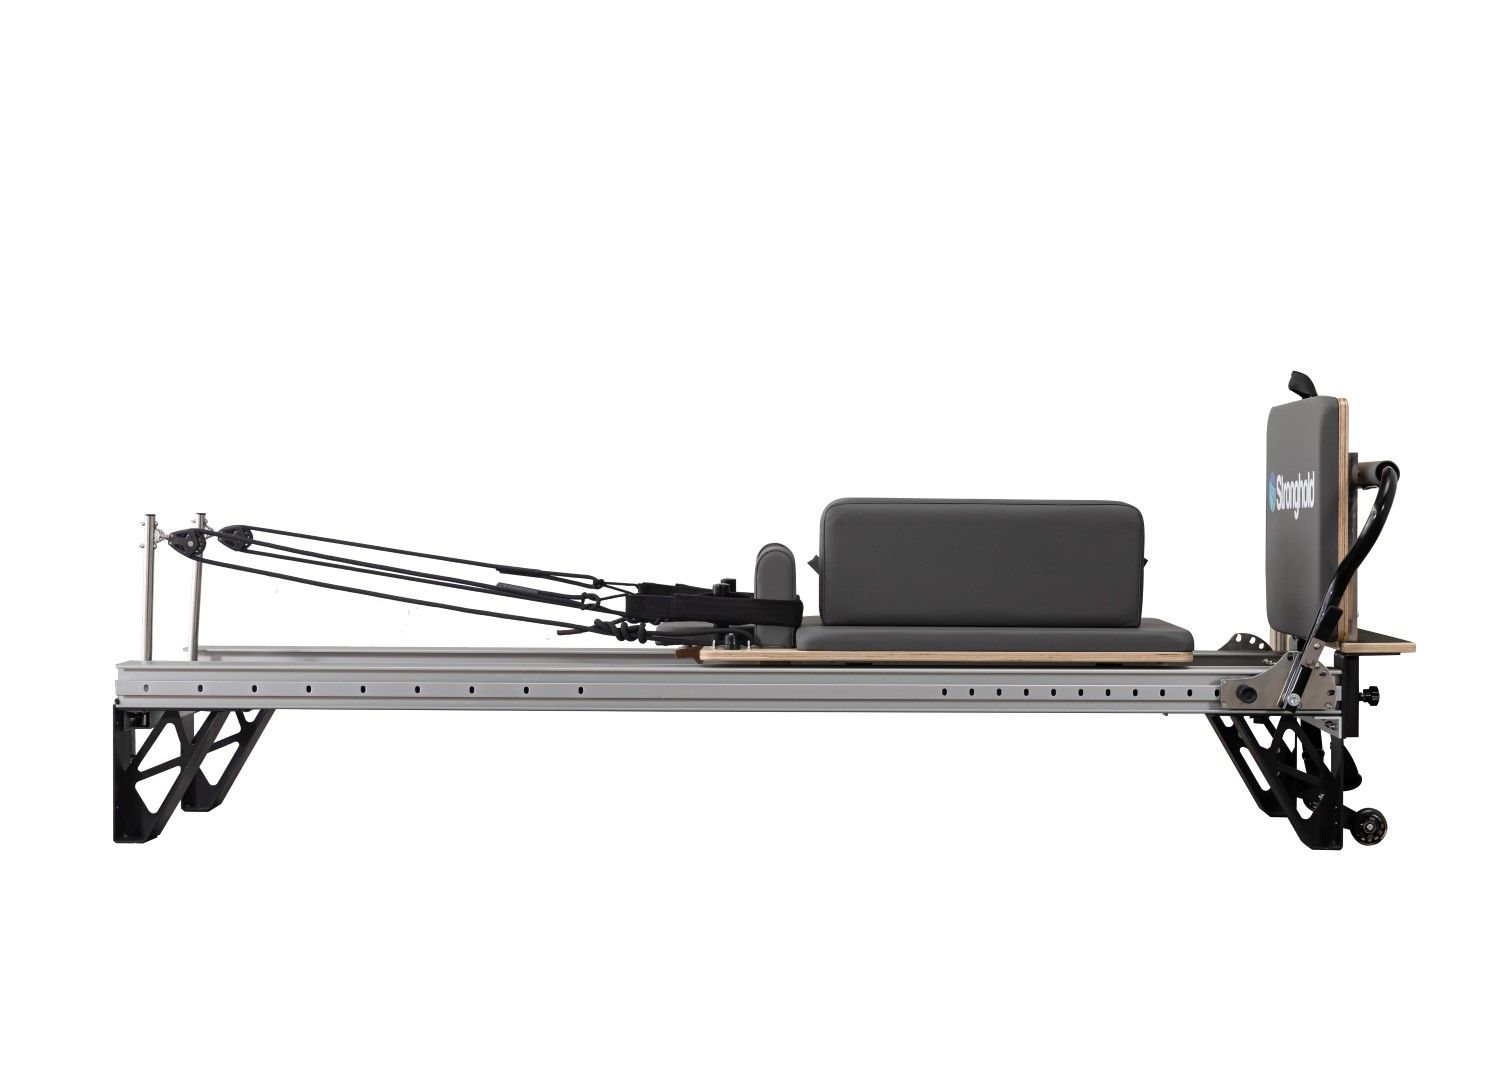 STRONGHOLD ELITE PILATES REFORMER PACKAGE / INCLUDING JUMP BOARD, SITTING BOX & MAT EXTENDER photo